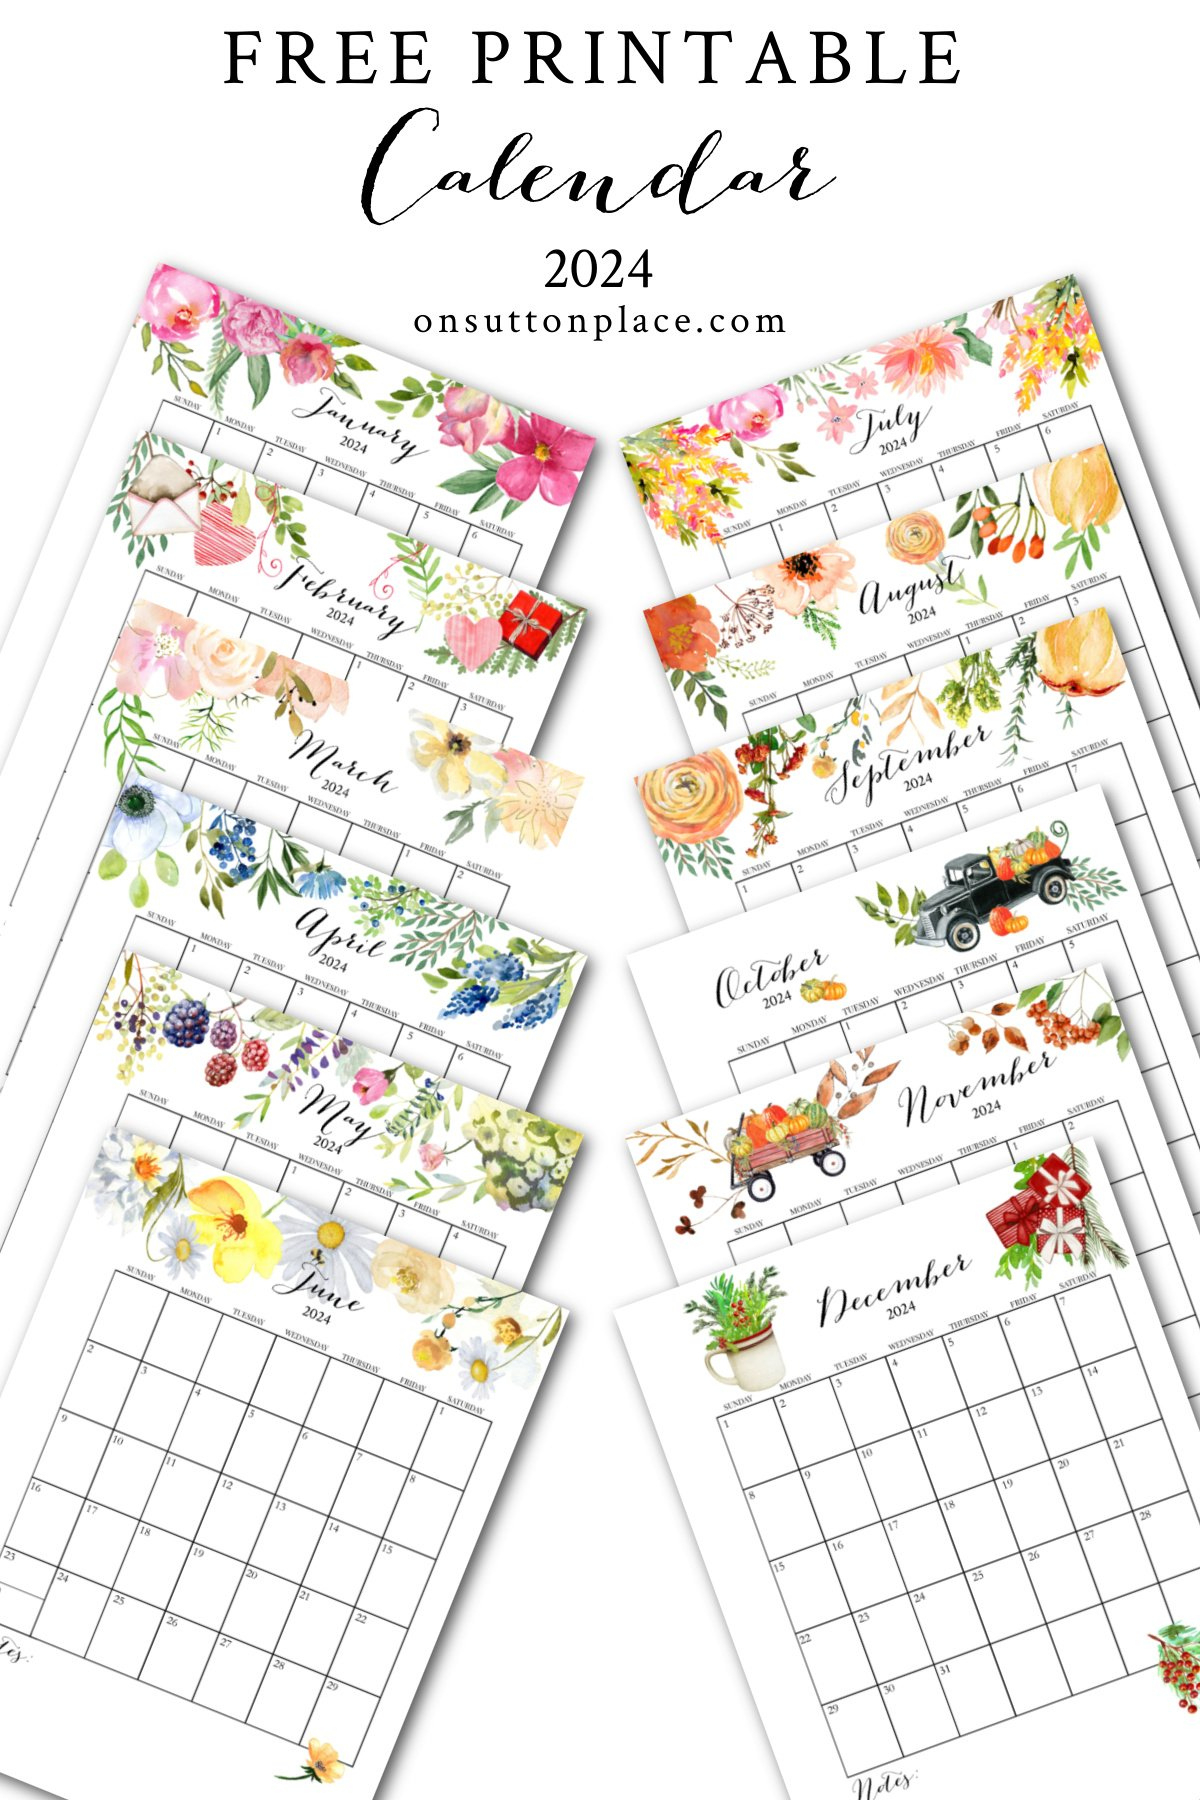 2024 Free Printable Calendar With Planner Pages - On Sutton Place | Printable Calendar Planner 2024